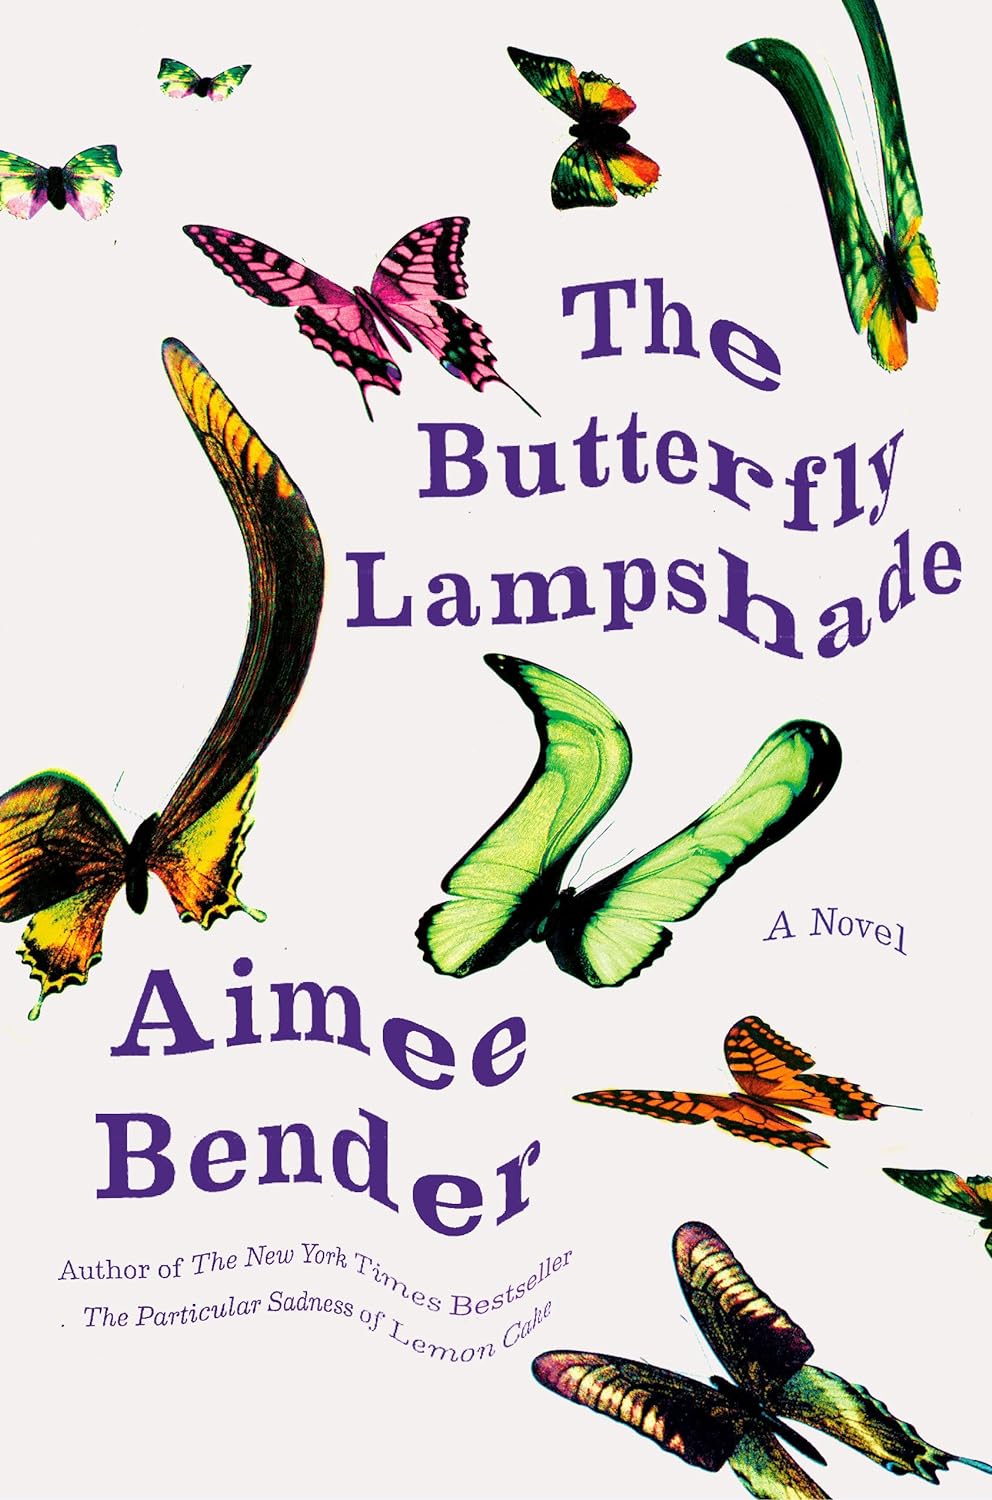 The Butterfly Lampshade_ A Nove - Aimee Bender